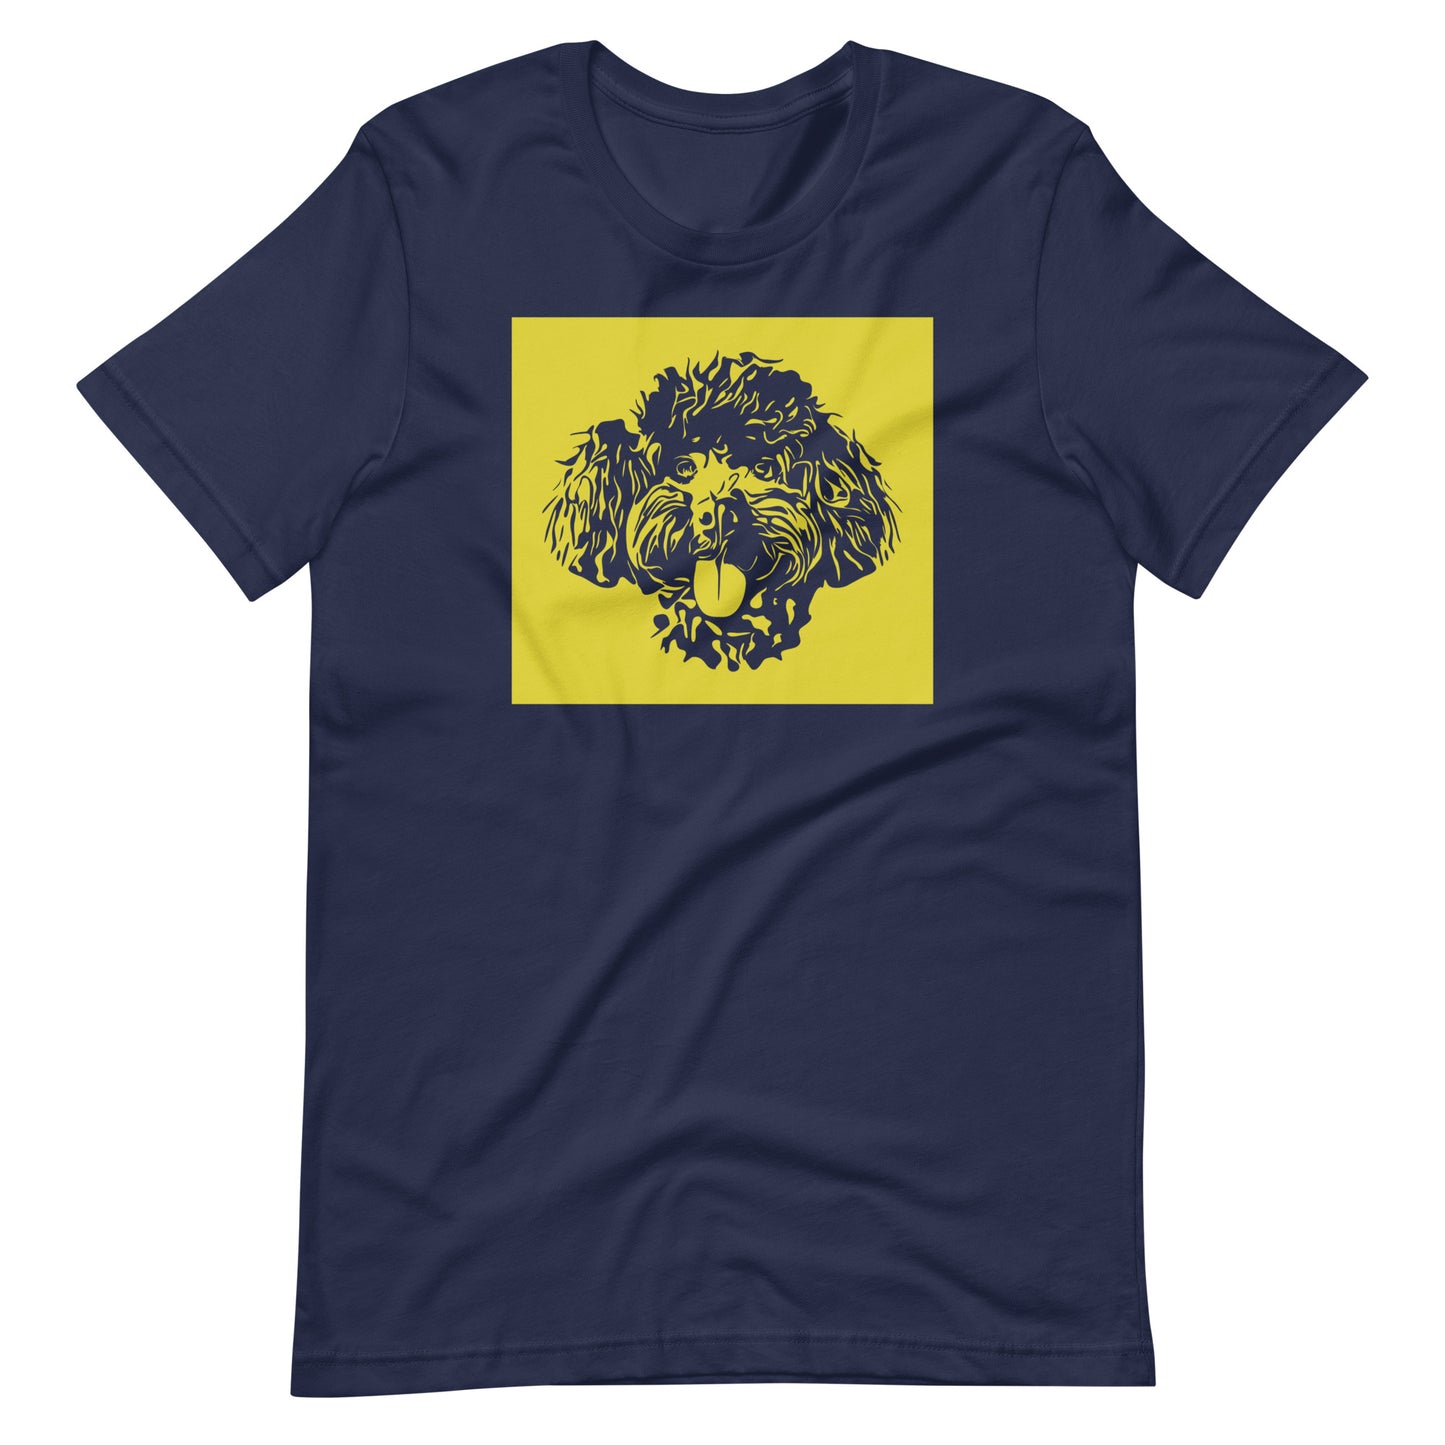 Toy Poodle face silhouette with yellow background square on unisex navy t-shirt